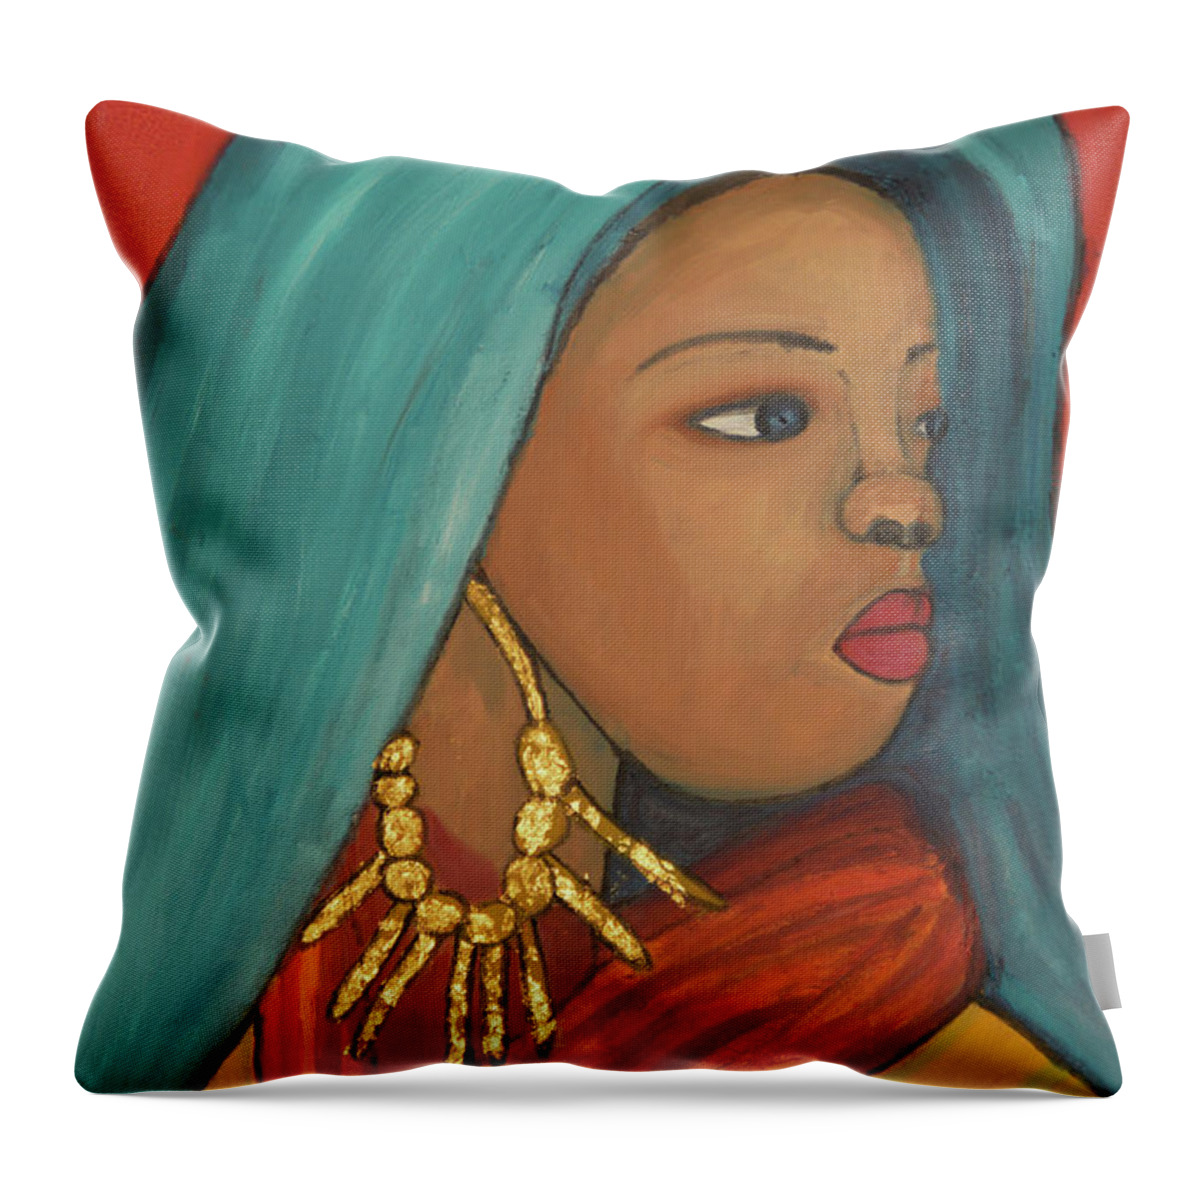 Women Throw Pillow featuring the painting The Earrings by Anita Hummel